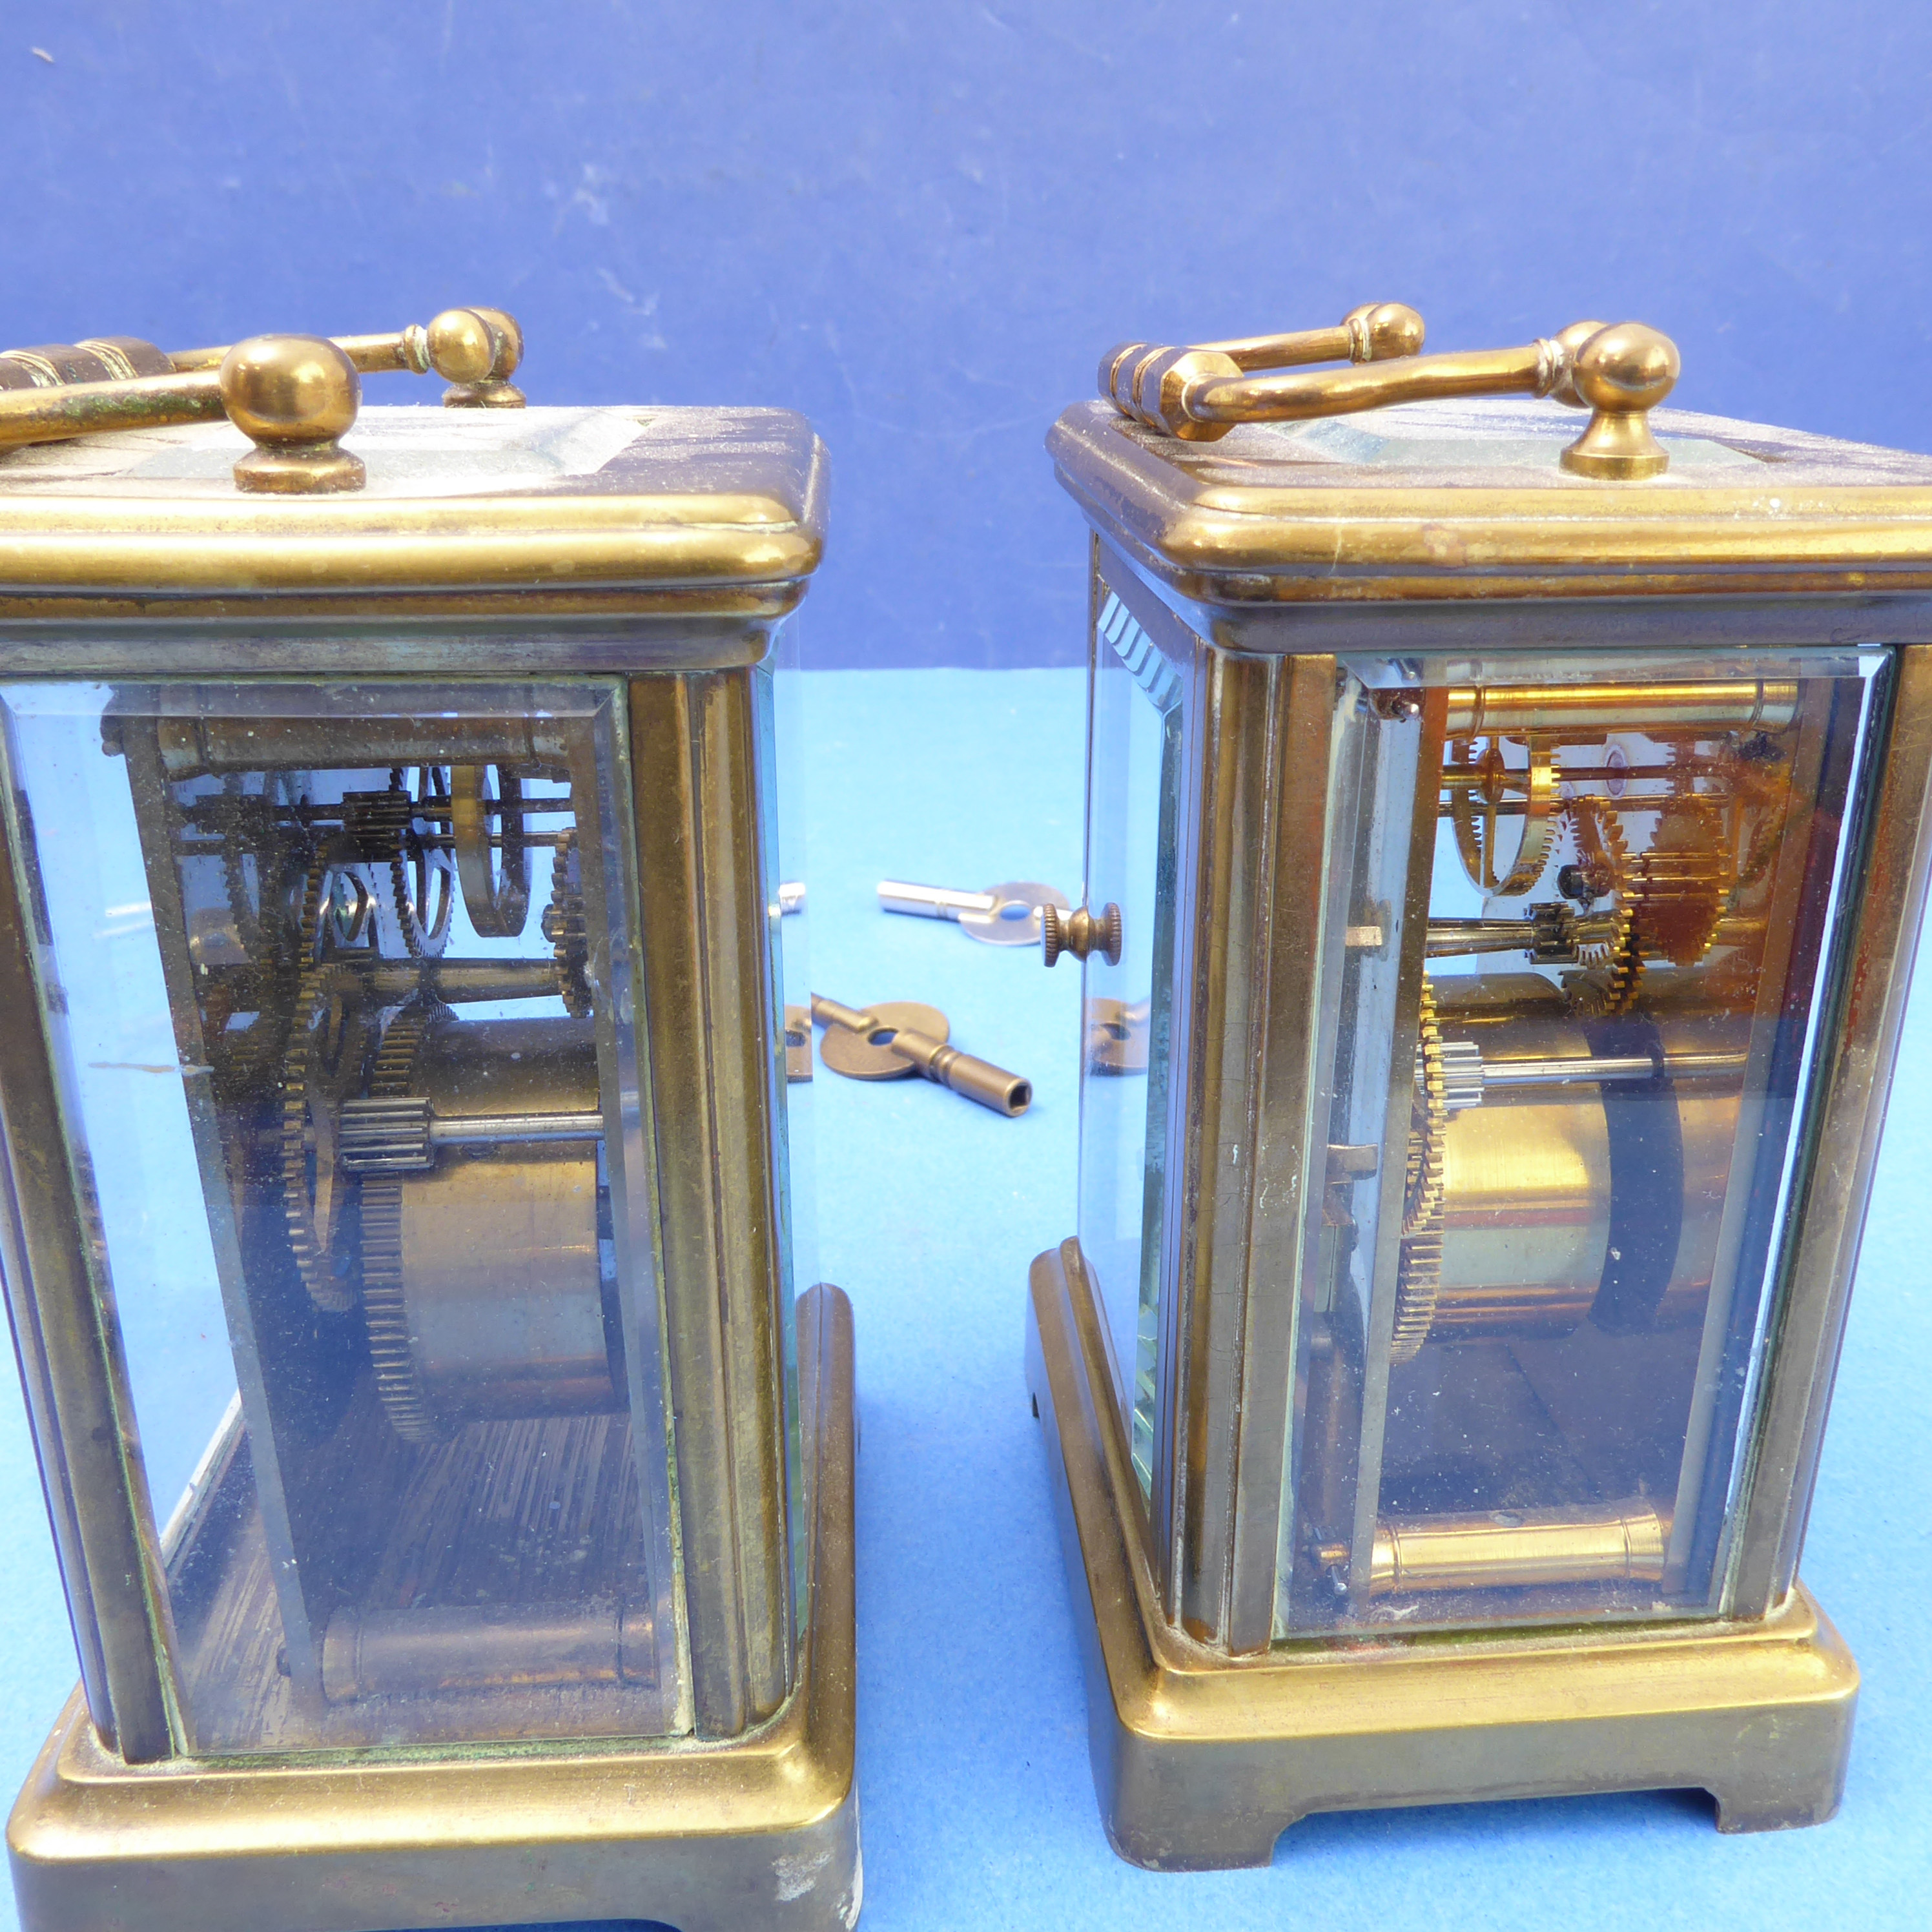 Two very similar 20th century brass carriage clocks each with white enamel dial with Roman numerals, - Image 8 of 8